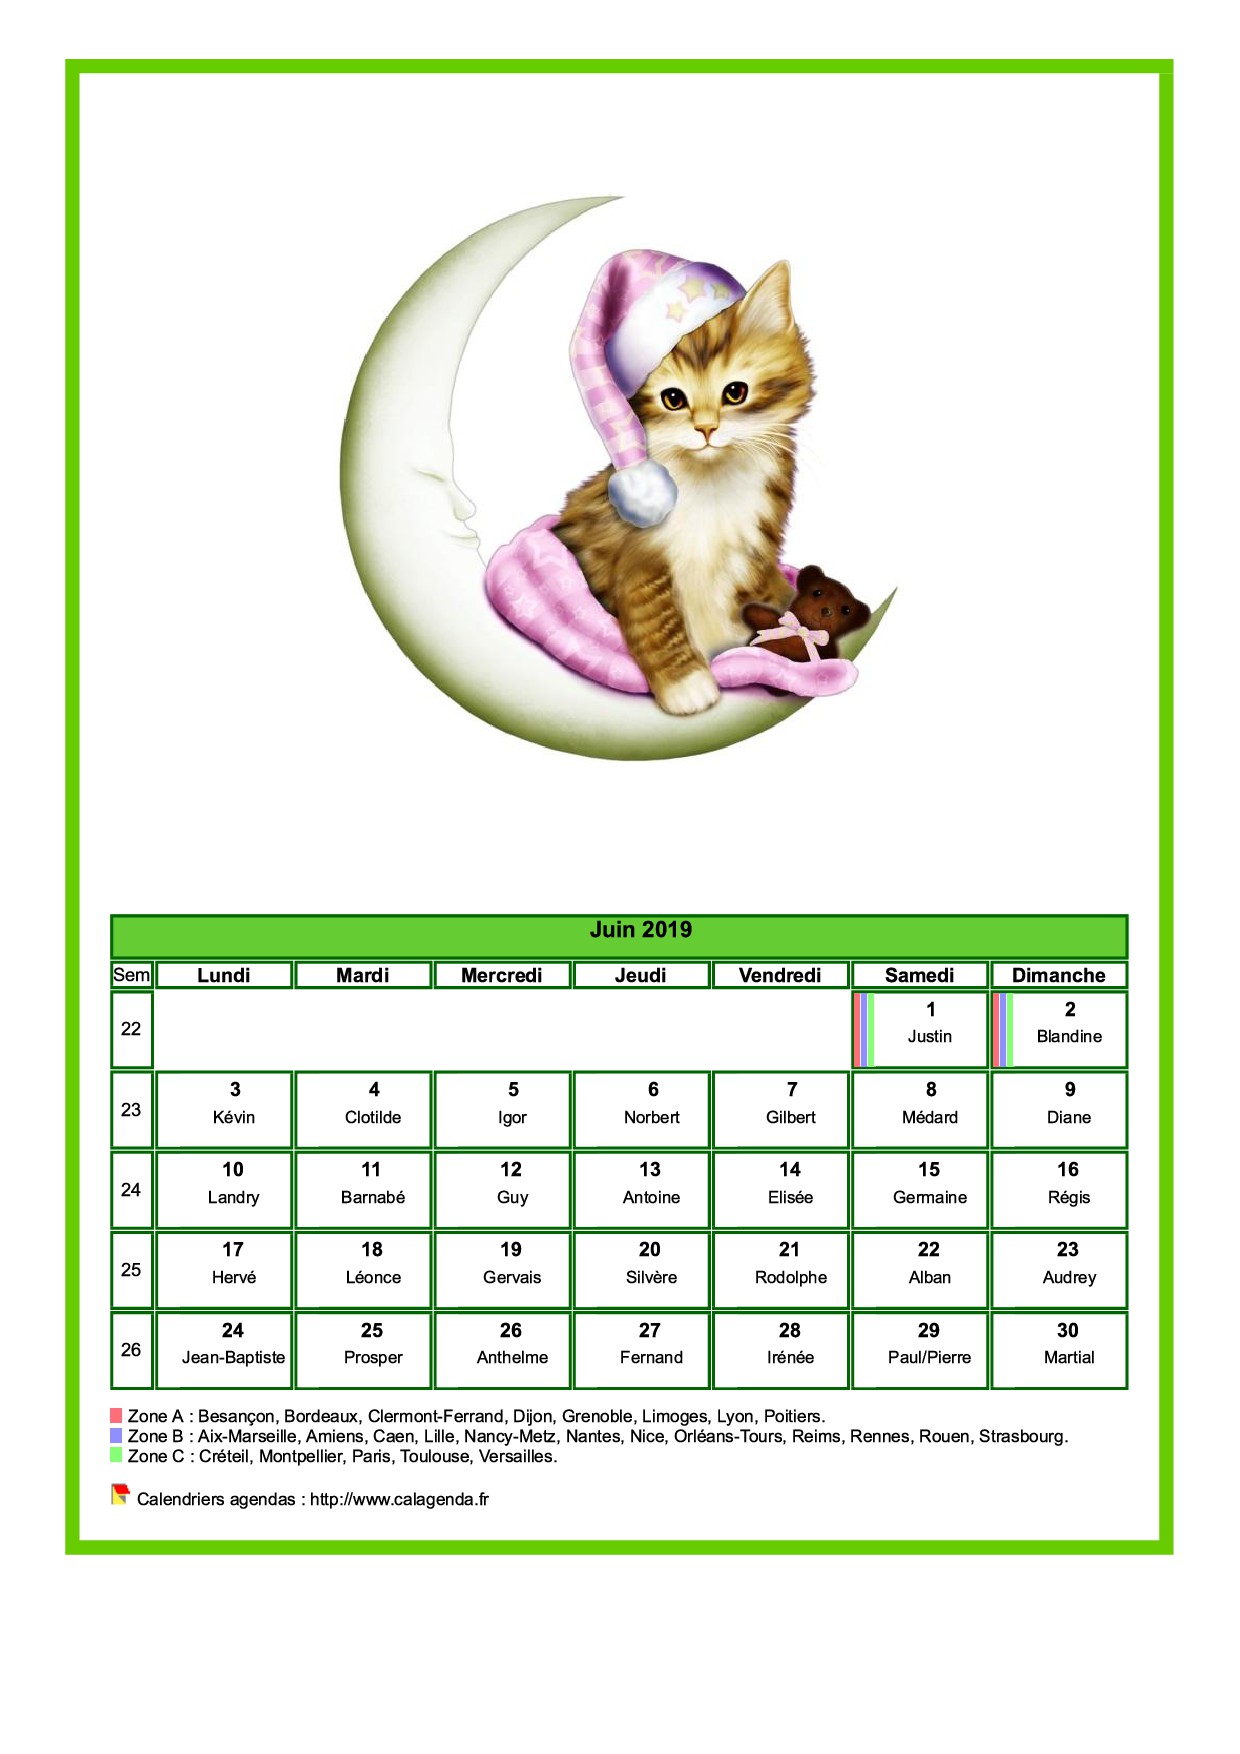 Calendrier juin 2019 chats